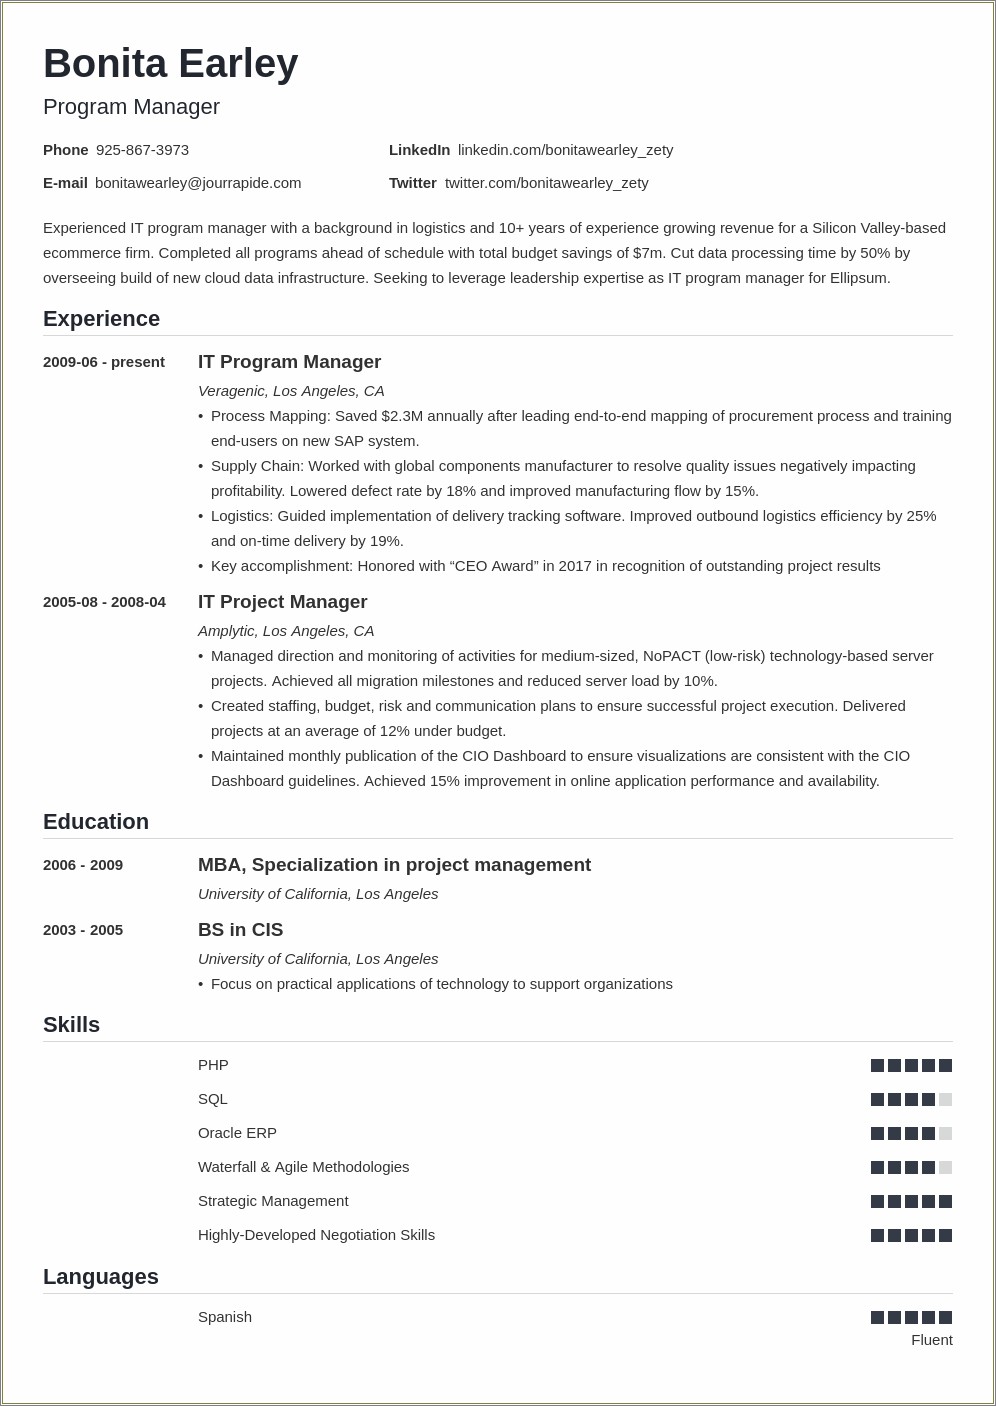 Resume For An Ecommerce Project Manager